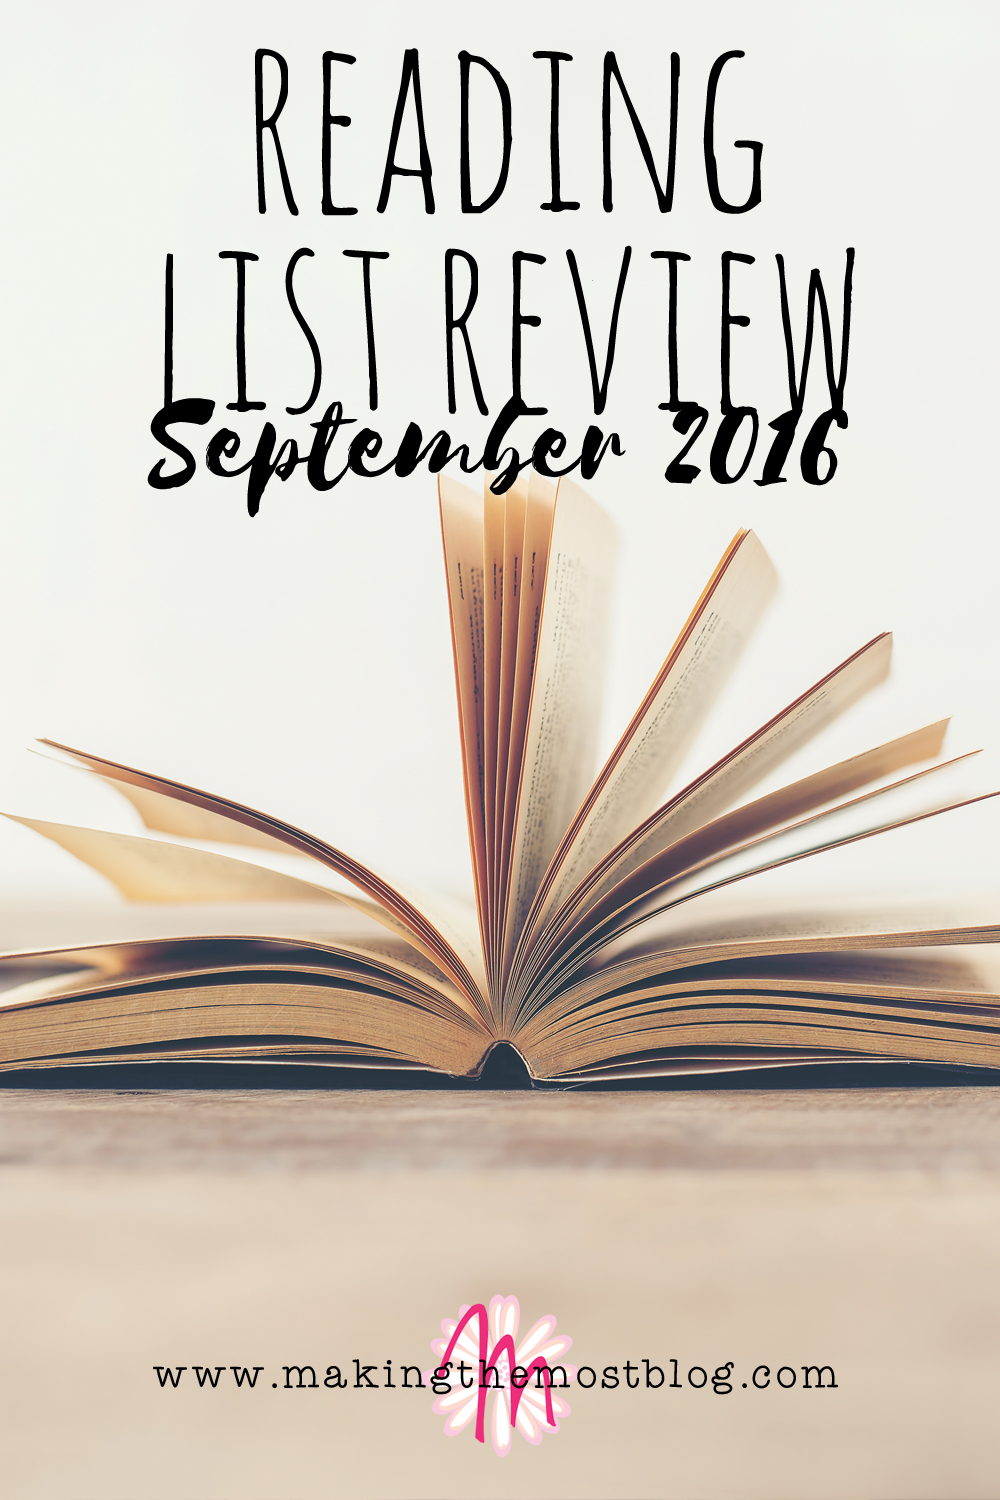 Reading List Review: September 2016 | Making the Most Blog